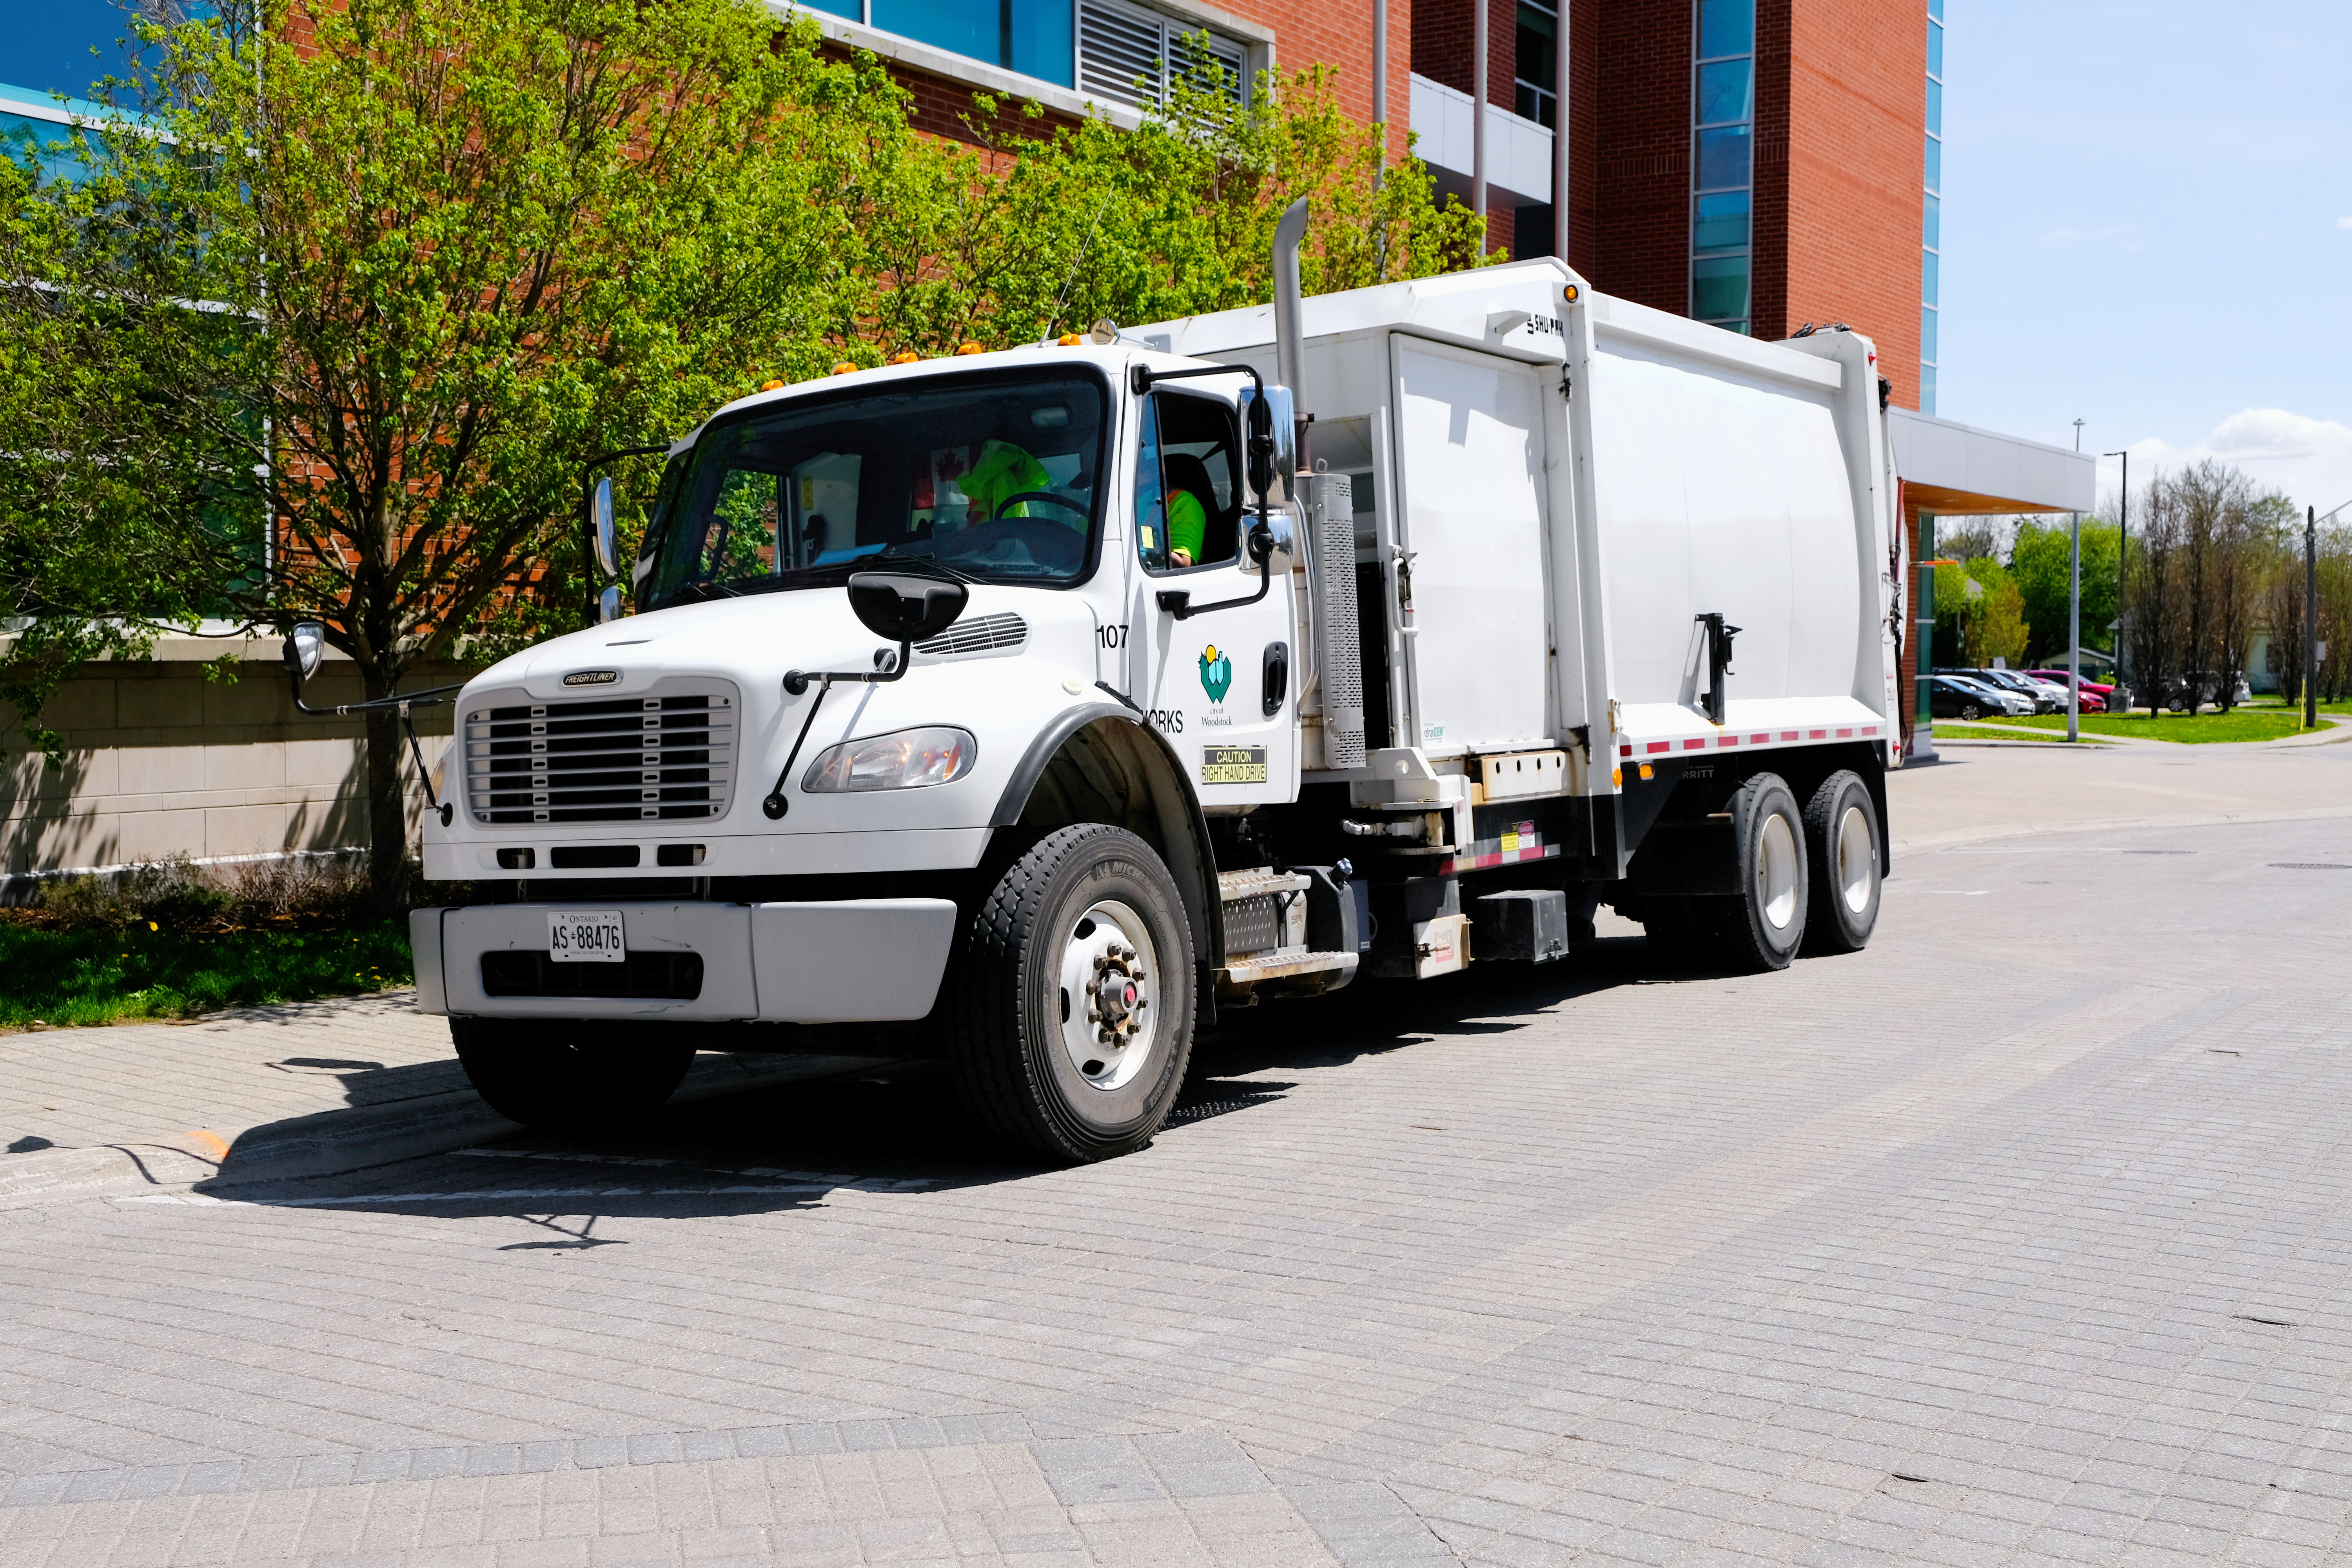 A photograph of a recycling truck in the City of Woodstock, Ontario.